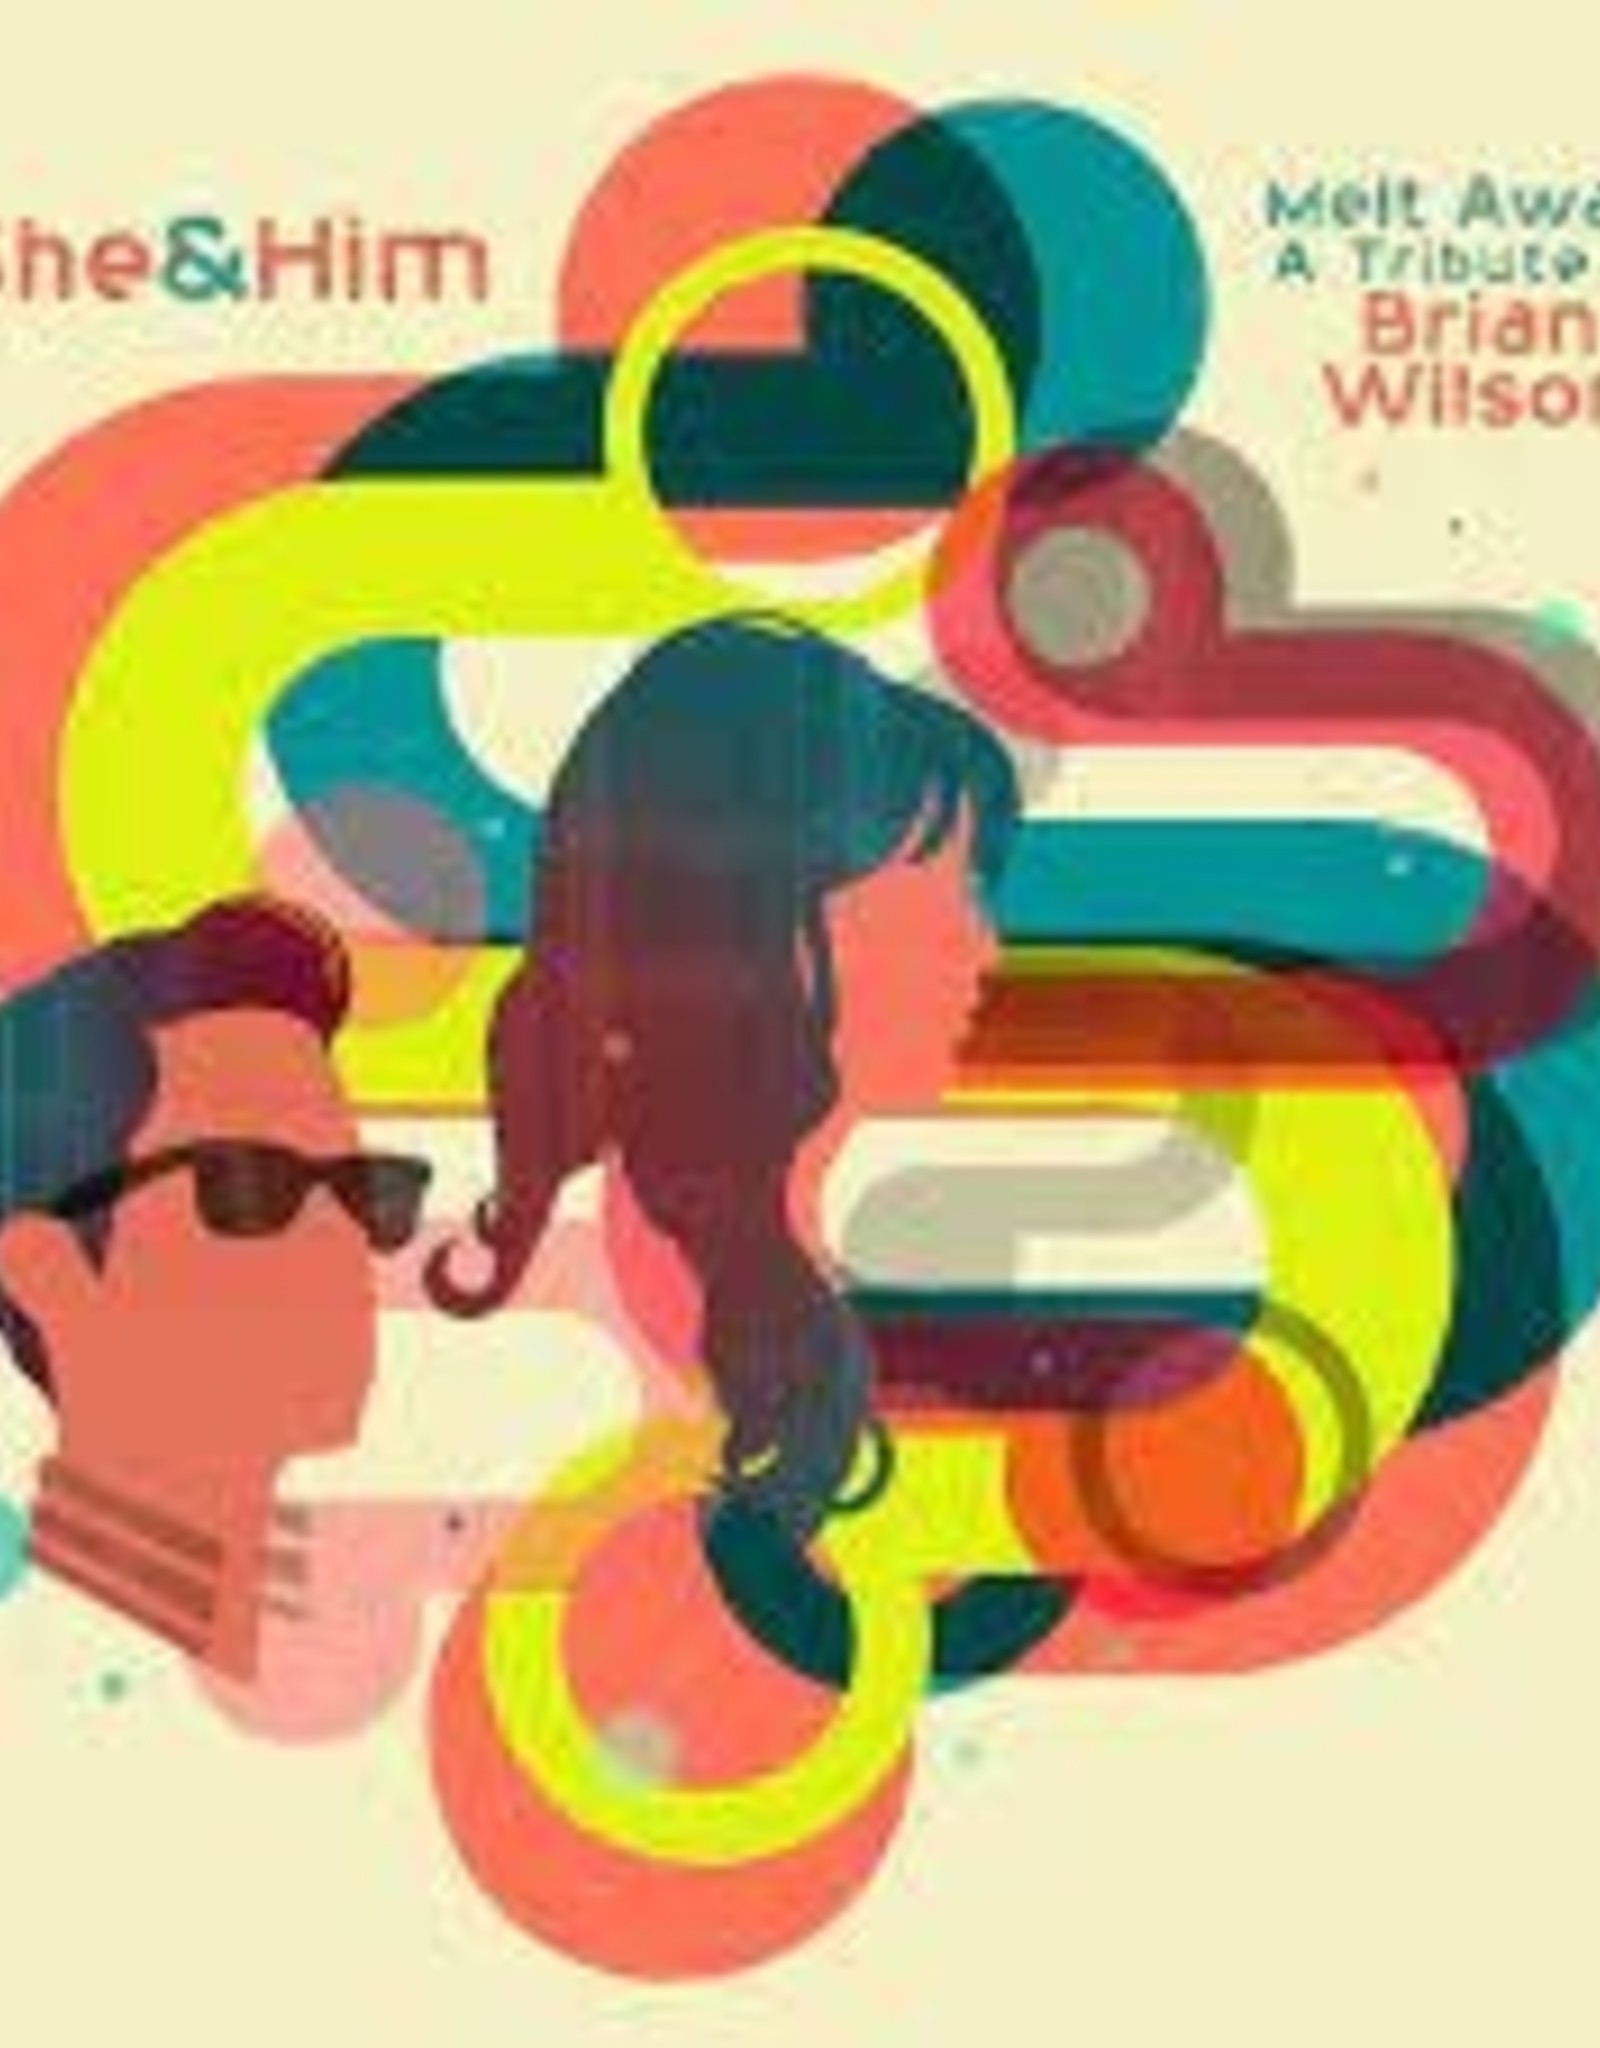 She & Him - Melt Away: A Tribute To Brian Wilson (Limited Edition, Clear Vinyl, Indie Exclusive)